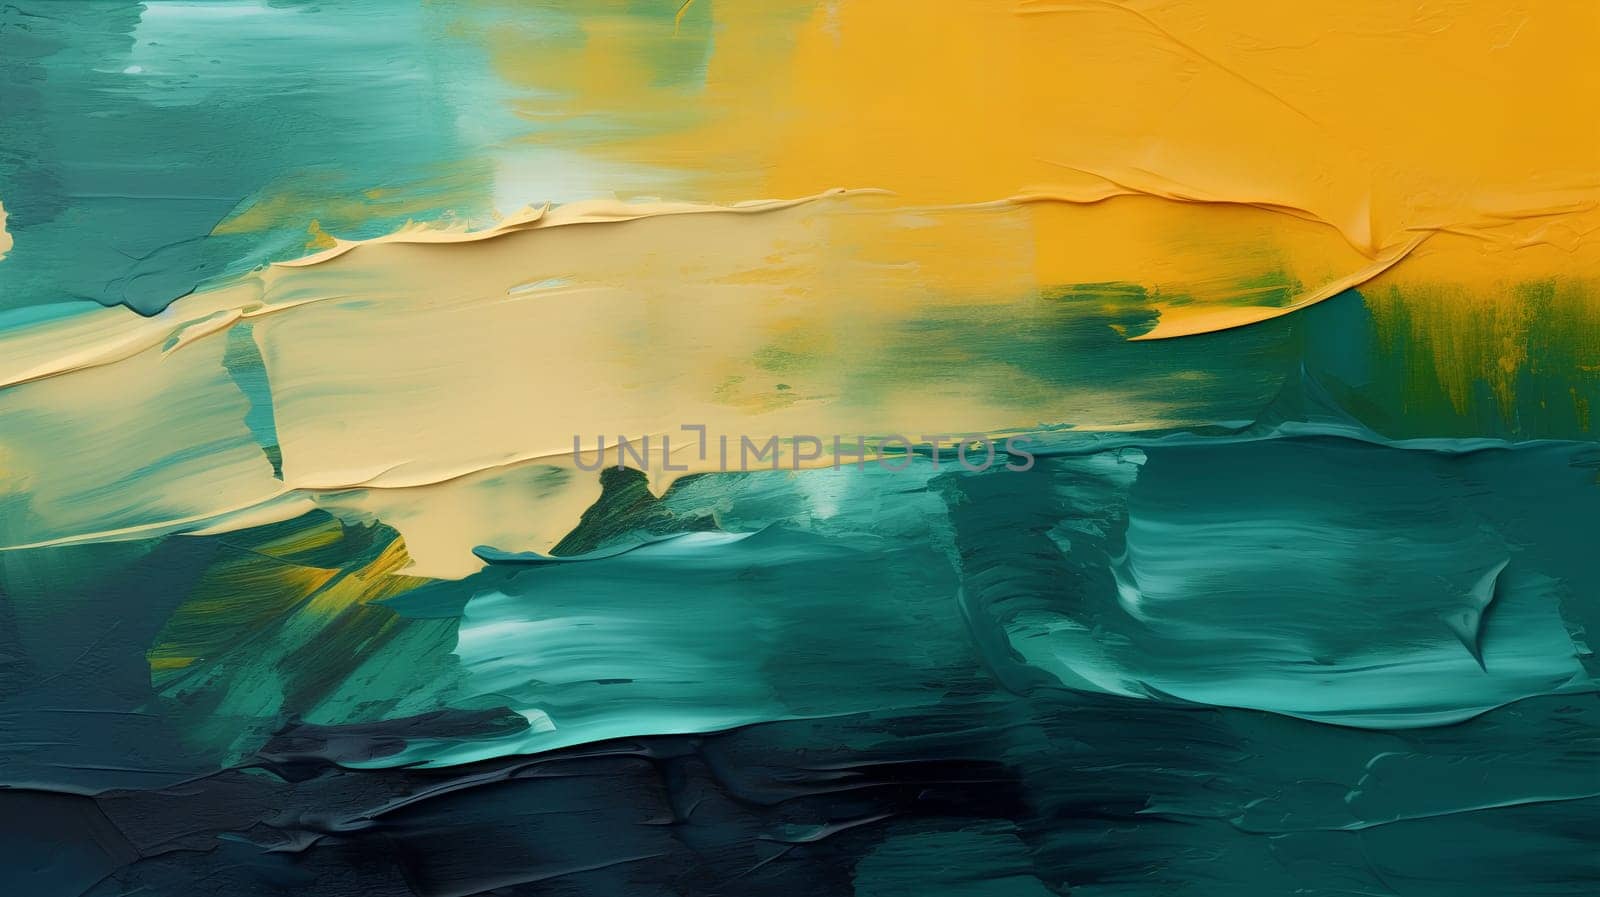 The smudged, abstract background is made in the grunge style, hand-painted in brown, green, yellow and dark blue colors